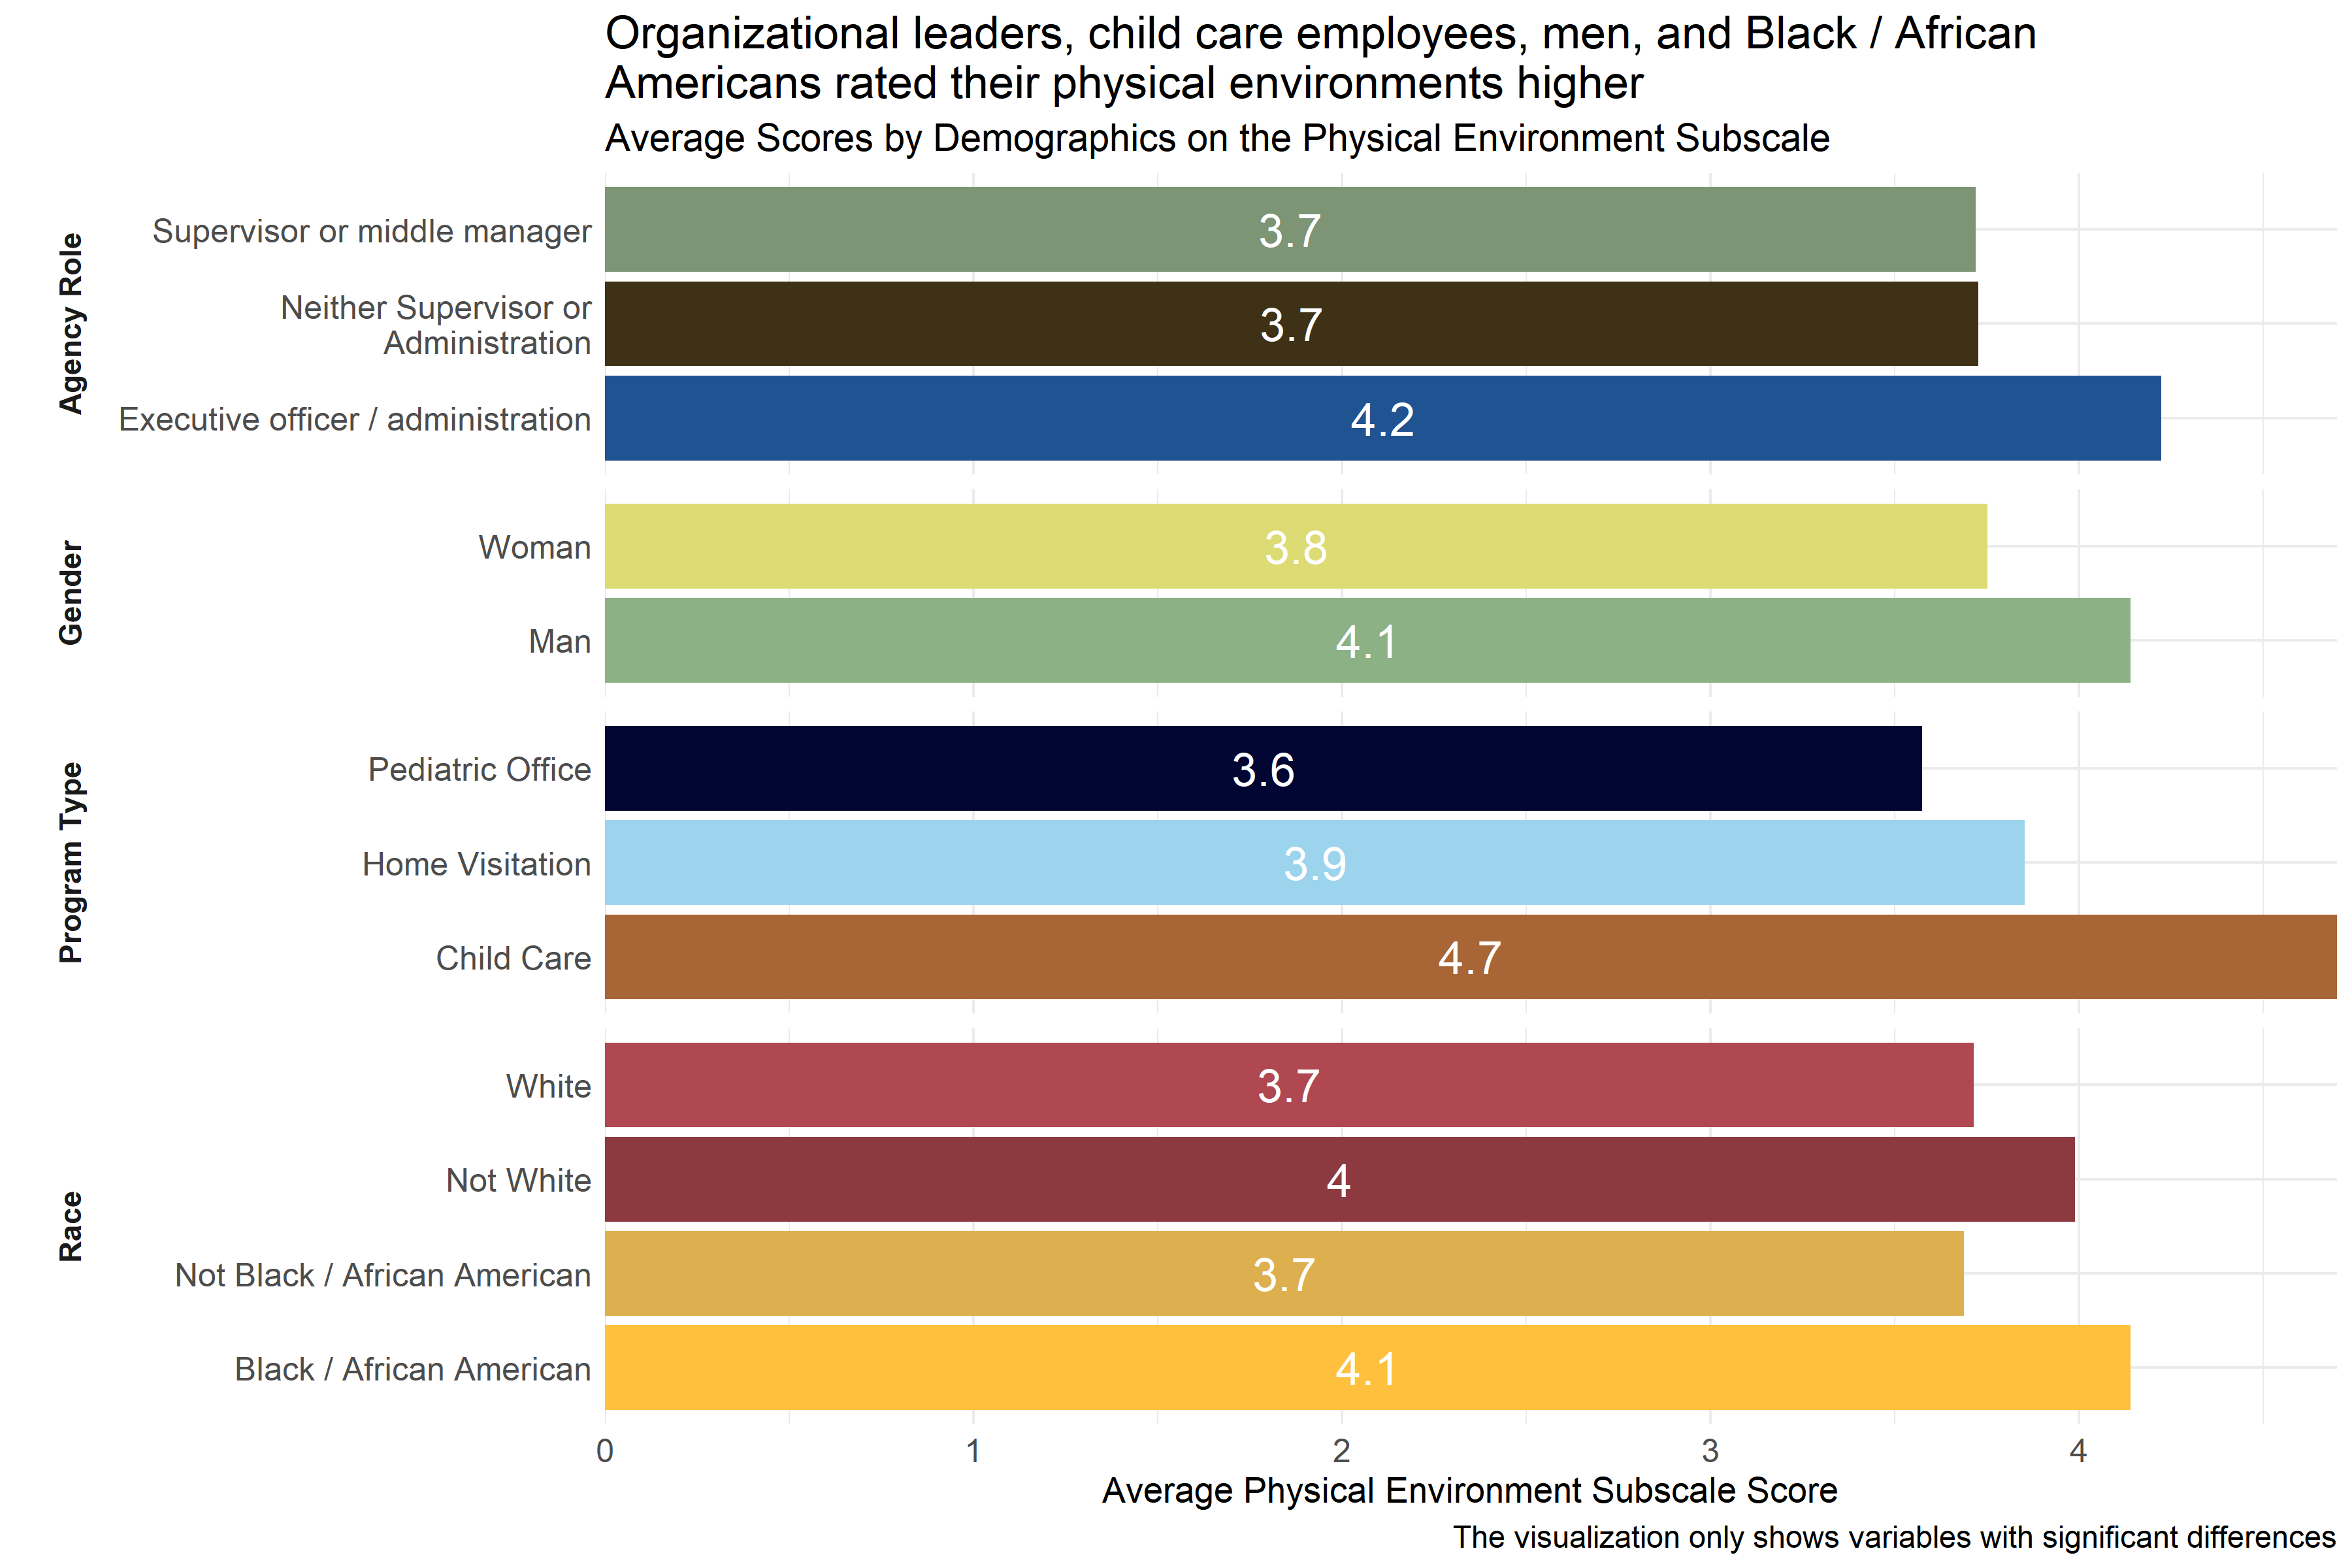 Average scores for Physical Environment Subscale across demographic groups